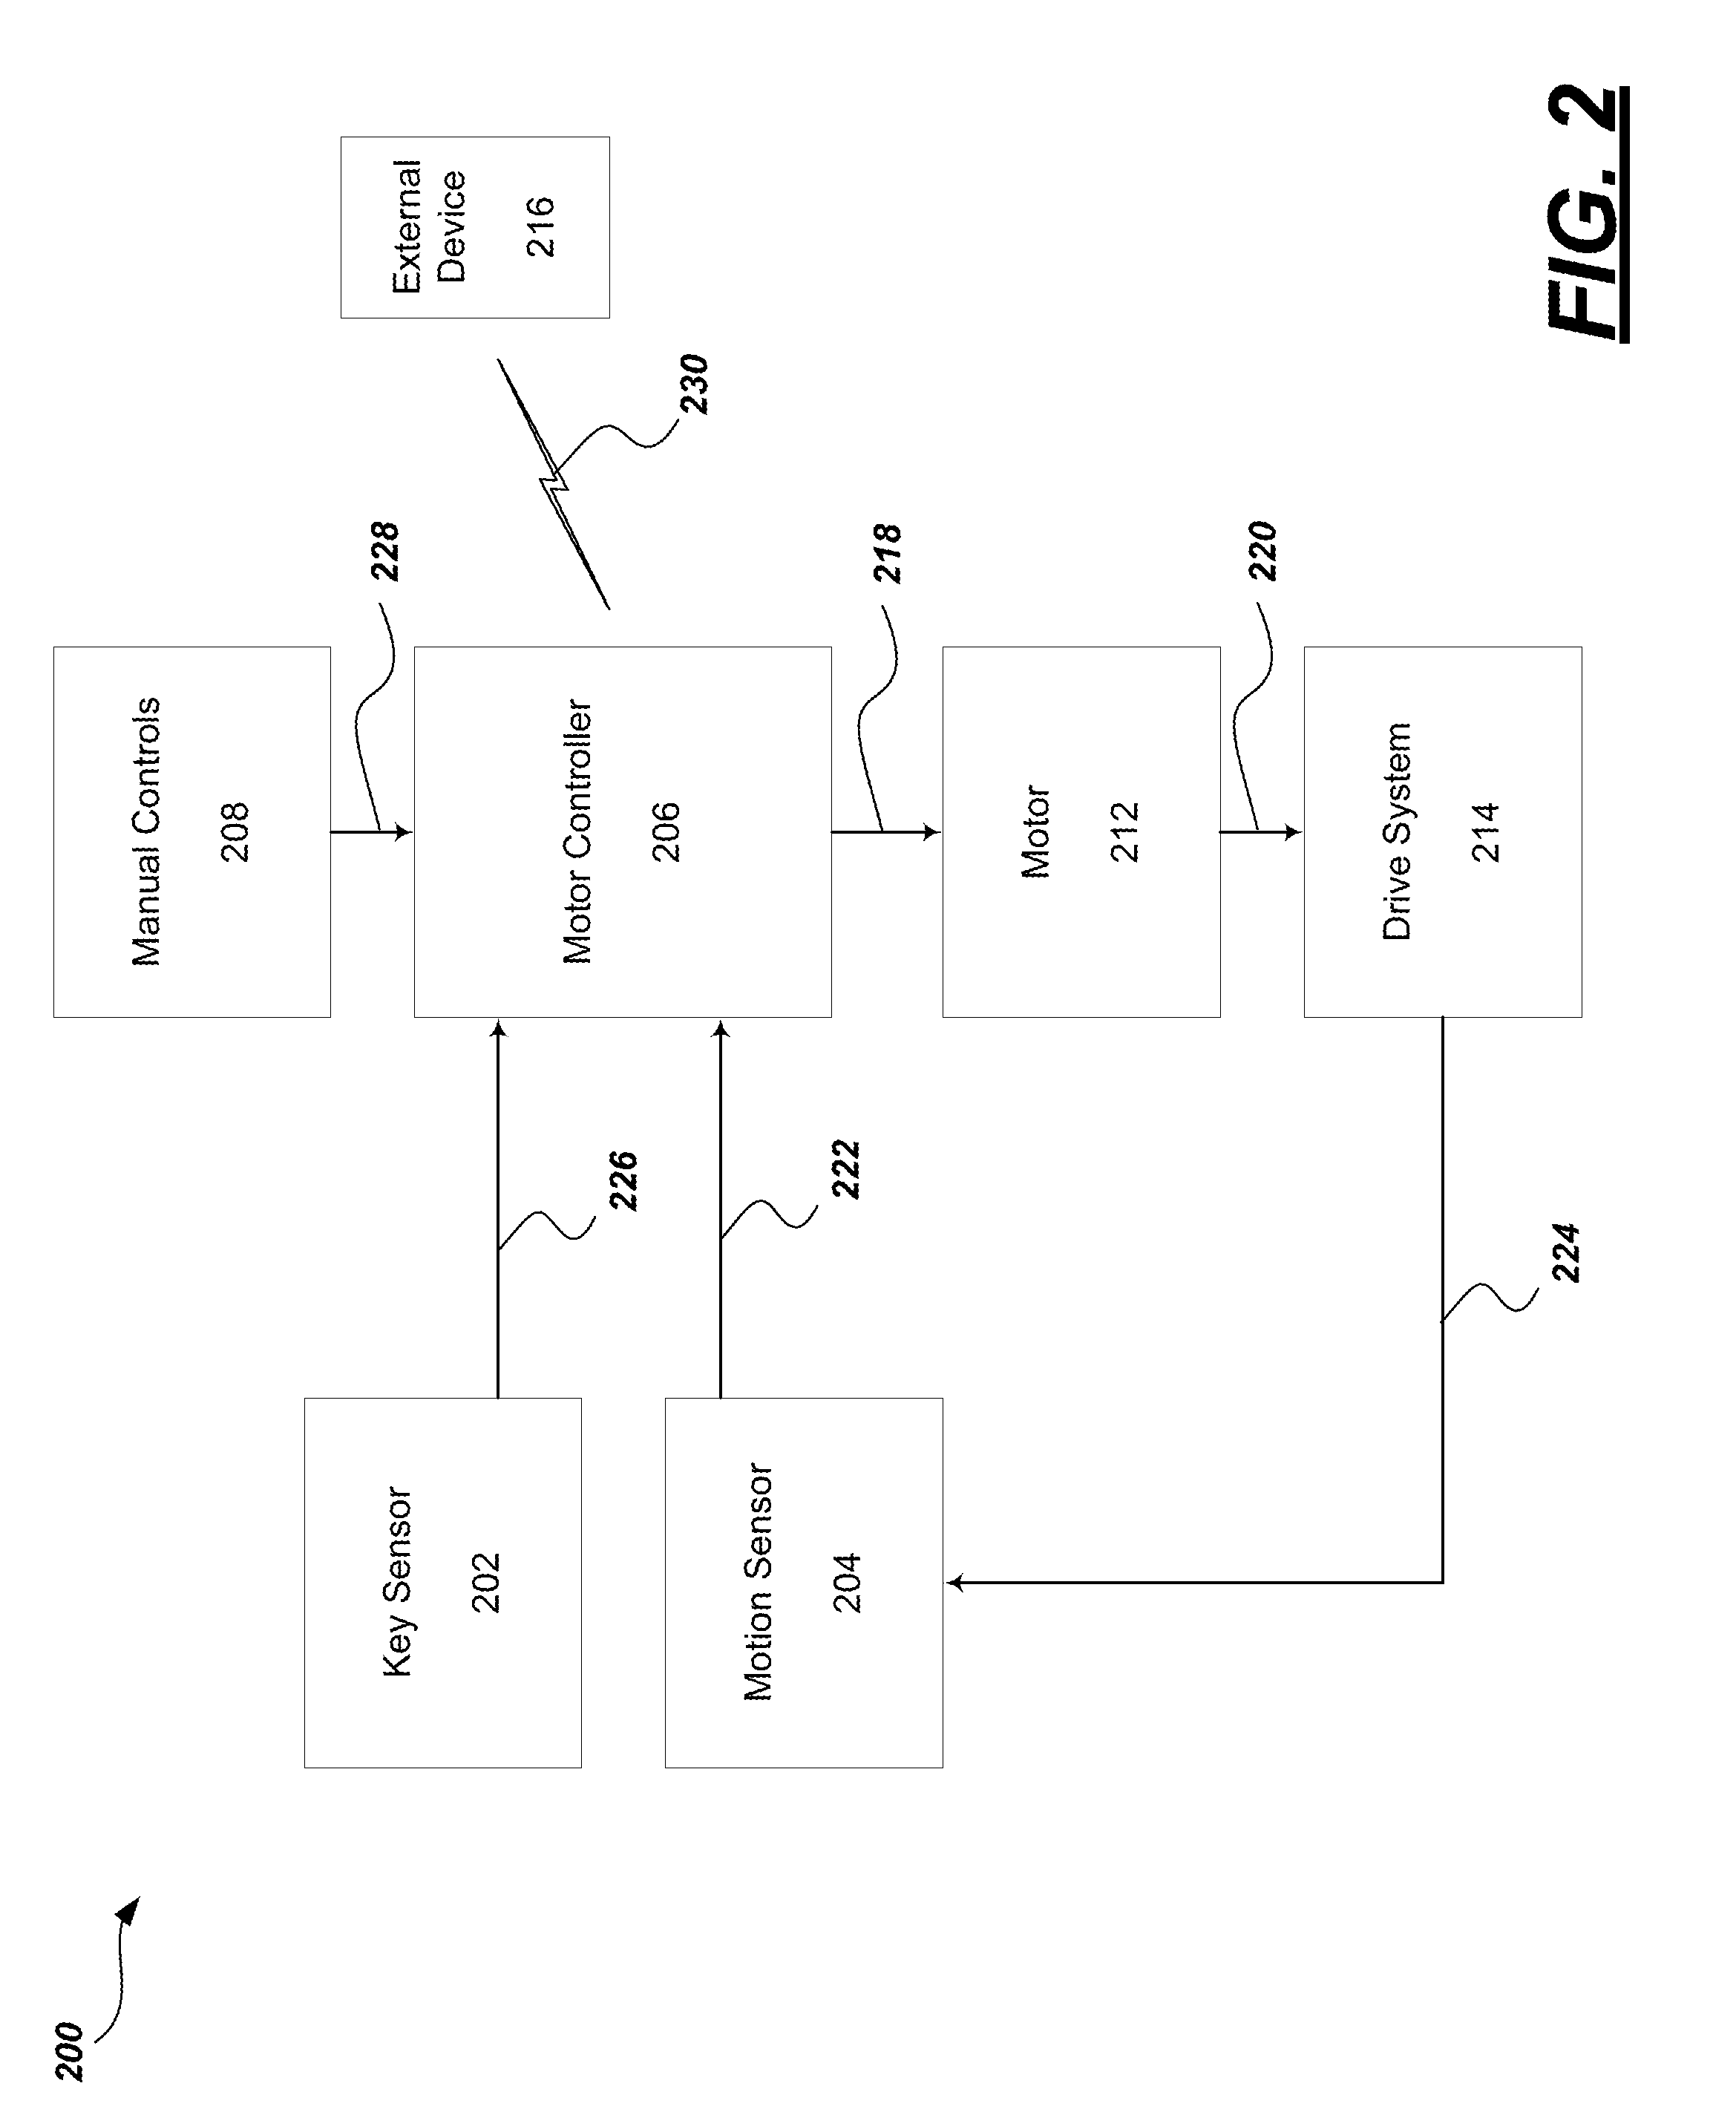 Apparatus, method and article for security of vehicles